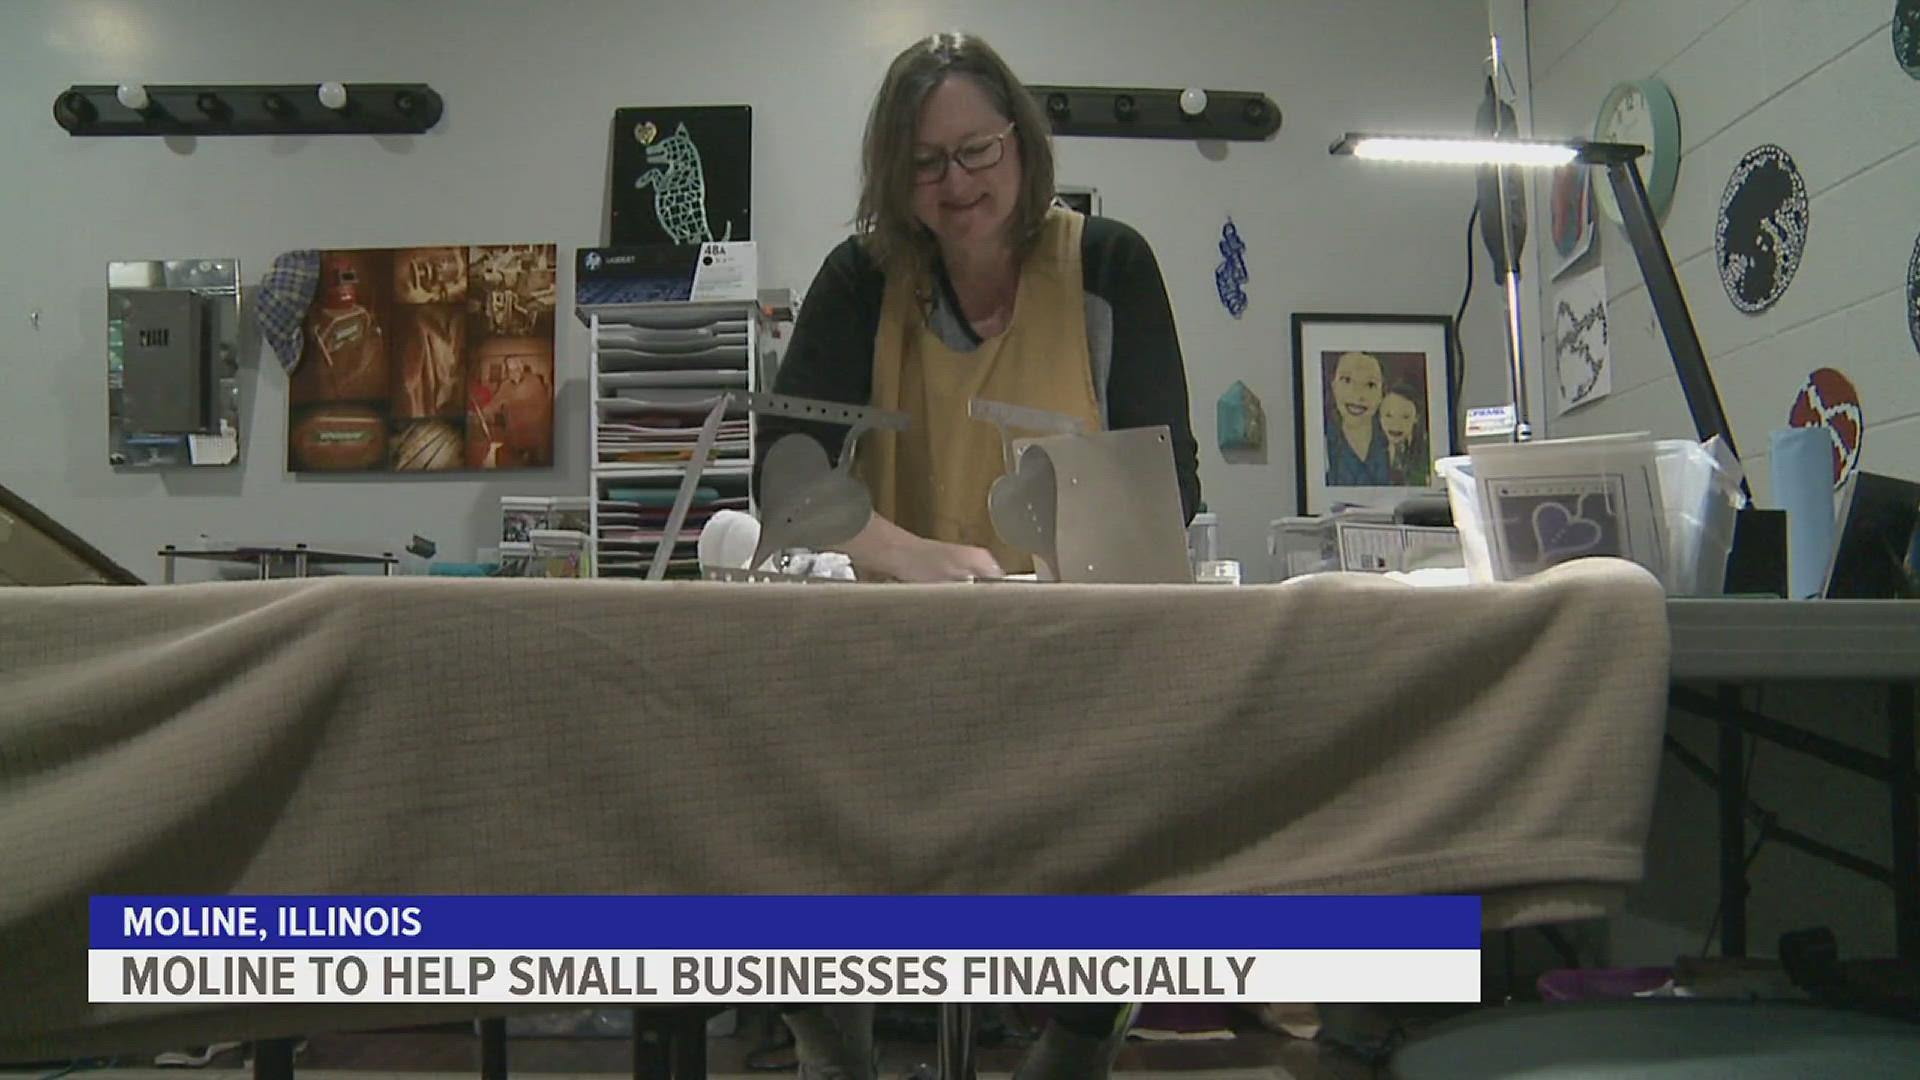 Angela Ridgway, owner of Angela Ridgway - Metal Artistry, is one of many small business owners potentially getting financial help through the program.